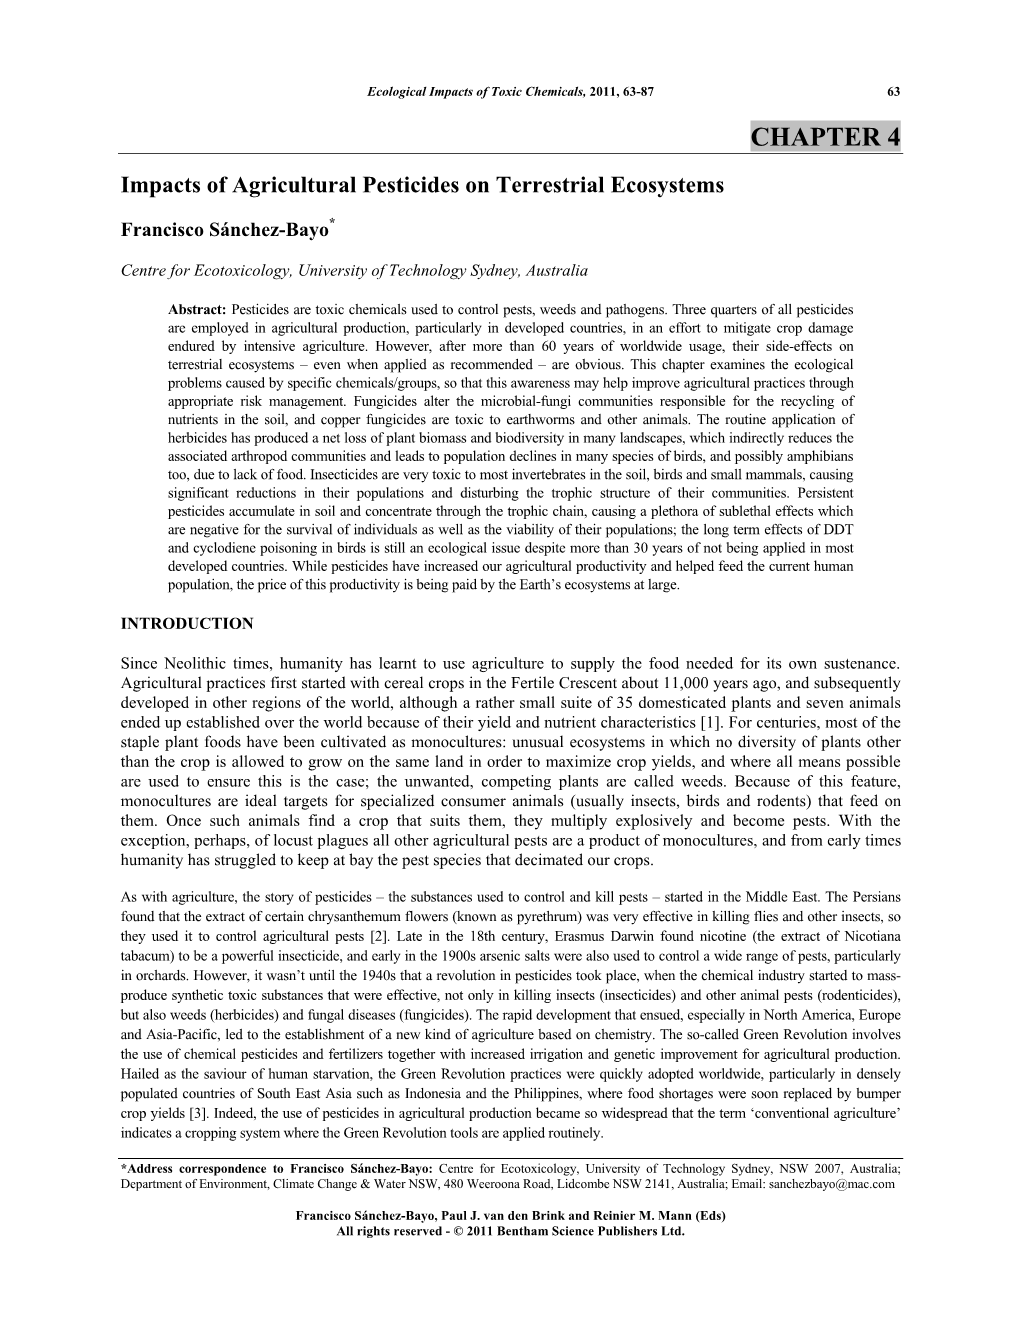 Impacts of Agricultural Pesticides on Terrestrial Ecosystems